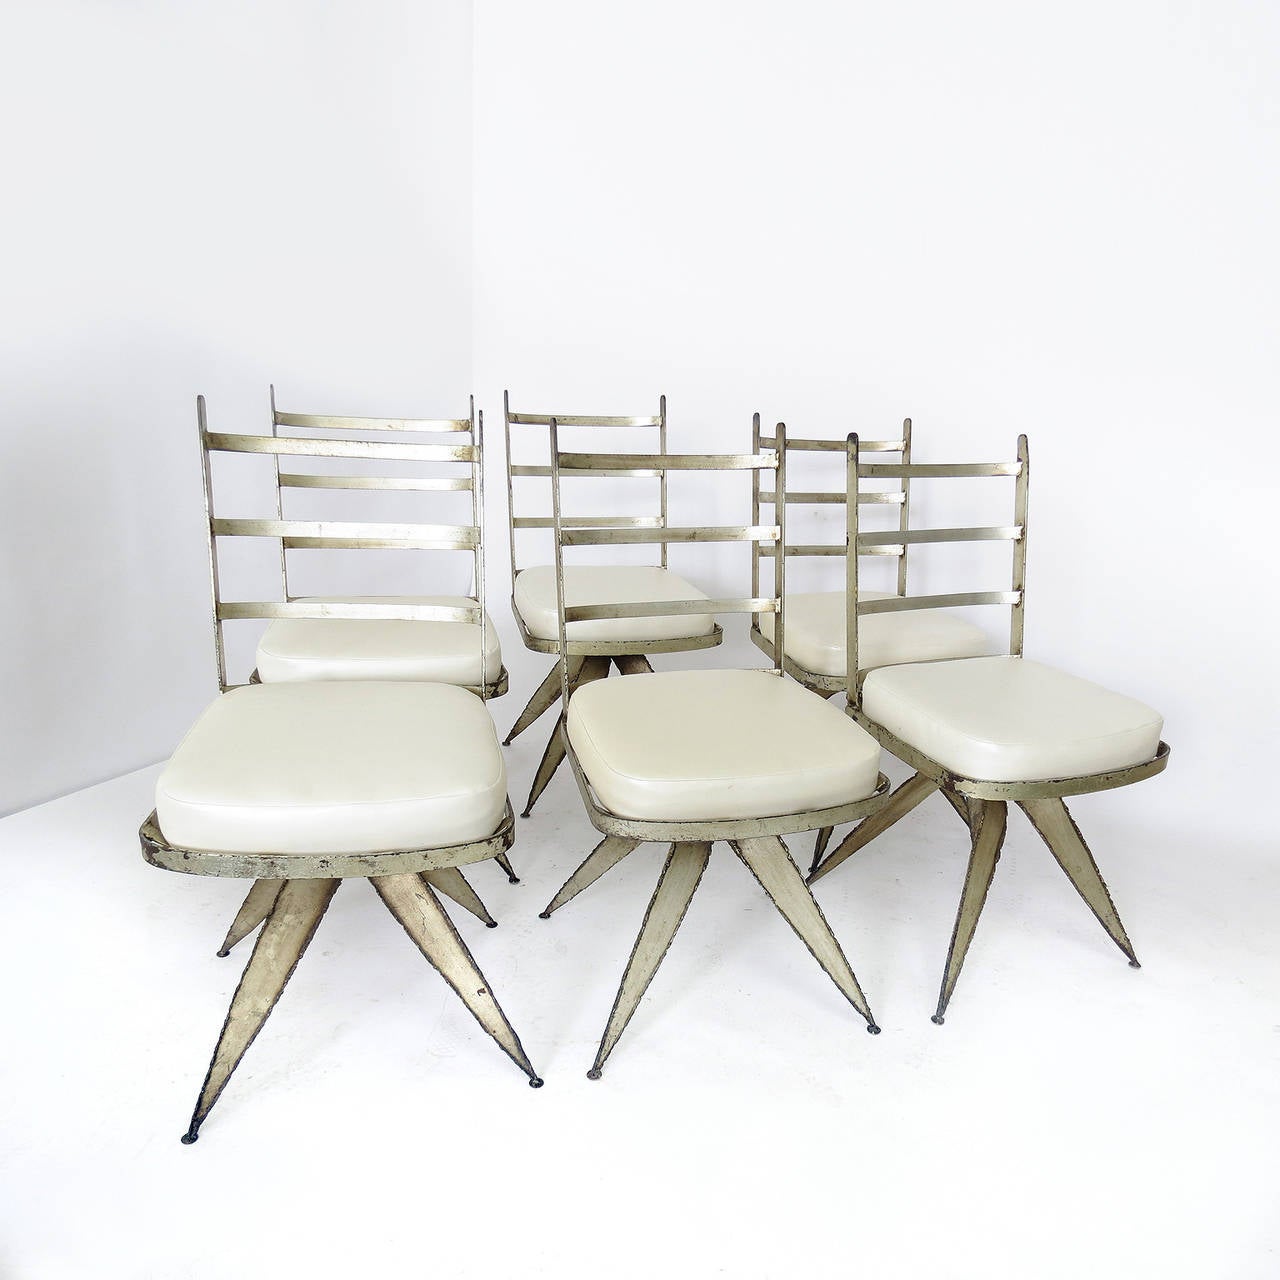 Steel Brutalist Dining Chairs